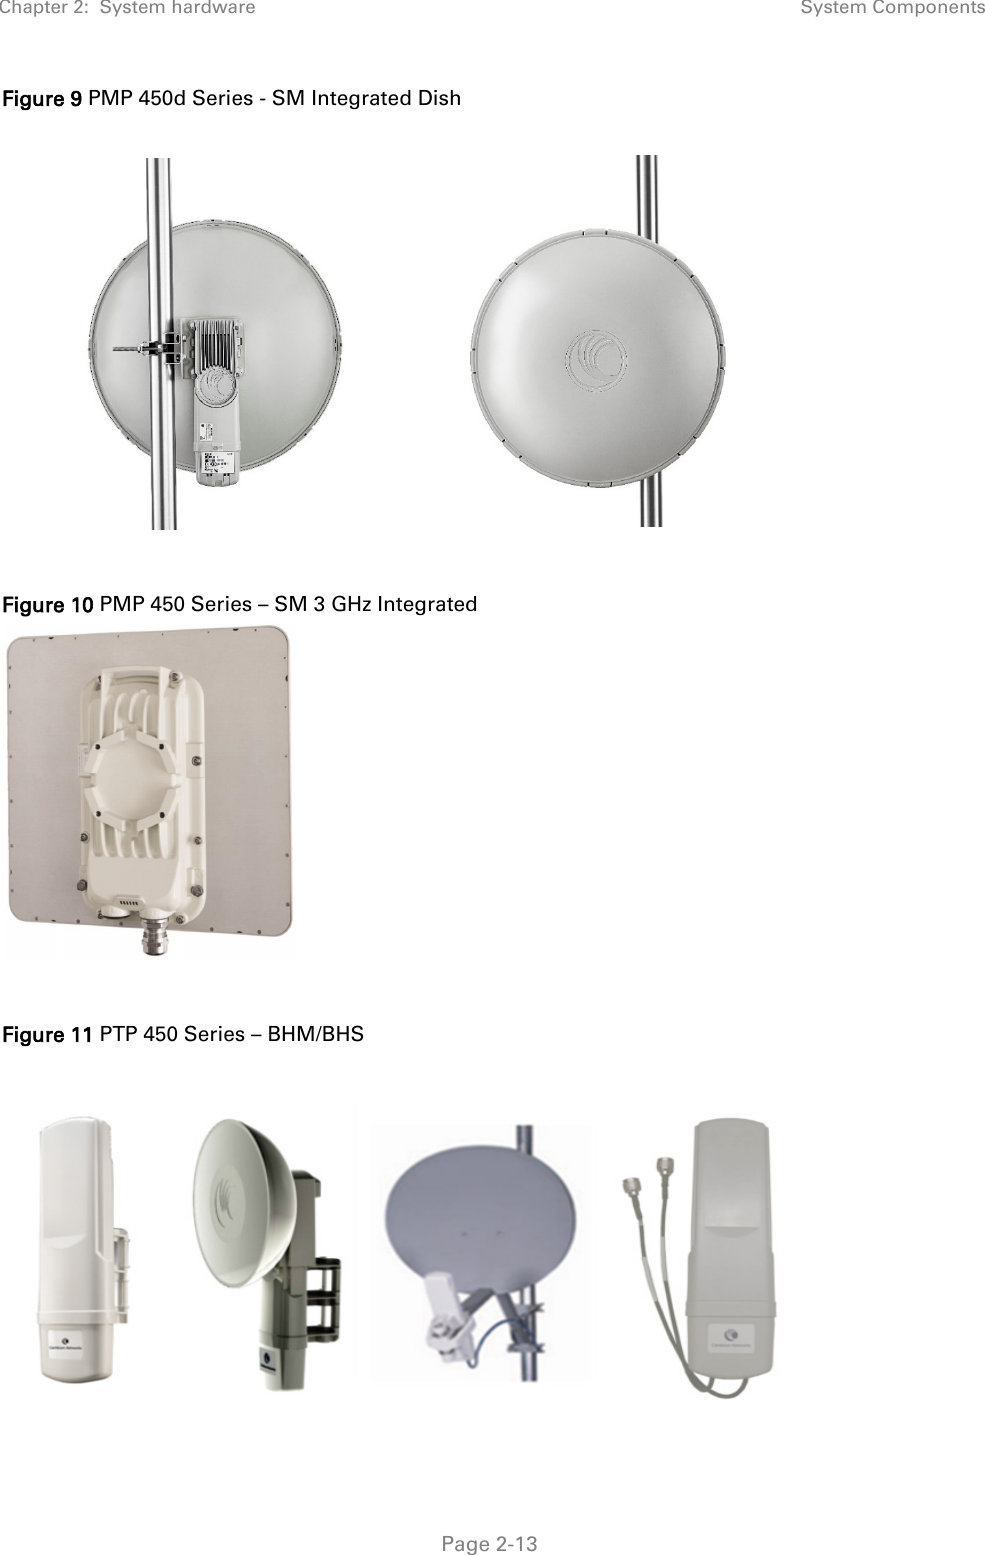 Chapter 2:  System hardware System Components   Page 2-13 Figure 9 PMP 450d Series - SM Integrated Dish    Figure 10 PMP 450 Series – SM 3 GHz Integrated    Figure 11 PTP 450 Series – BHM/BHS   